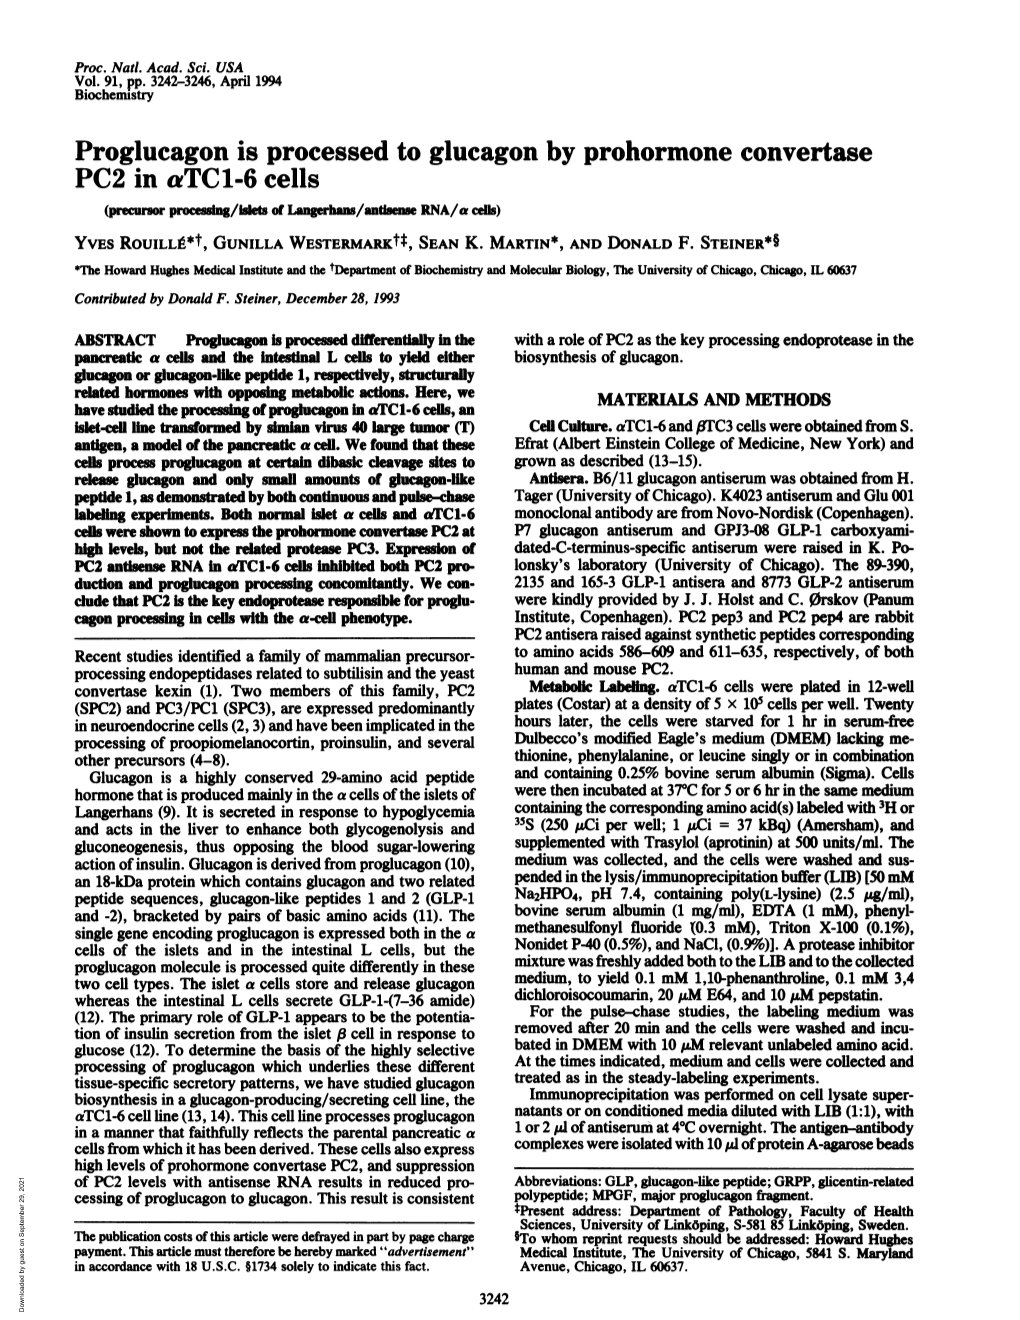 Proglucagon Is Processed to Glucagon by Prohormone Convertase PC2 In